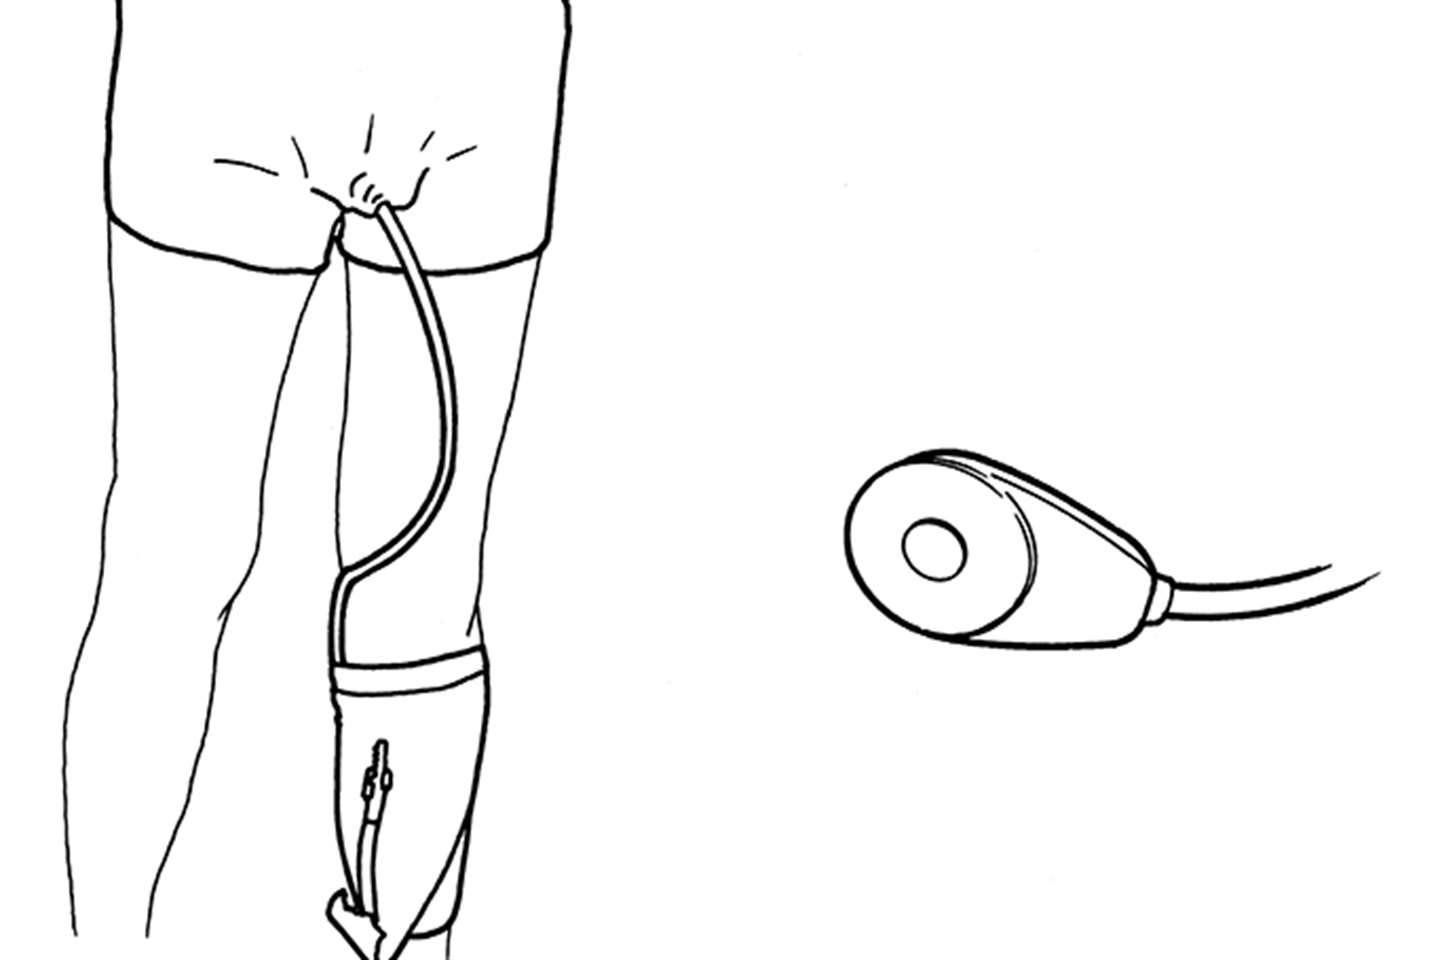 Body worn urinal with soft cup - line drawing